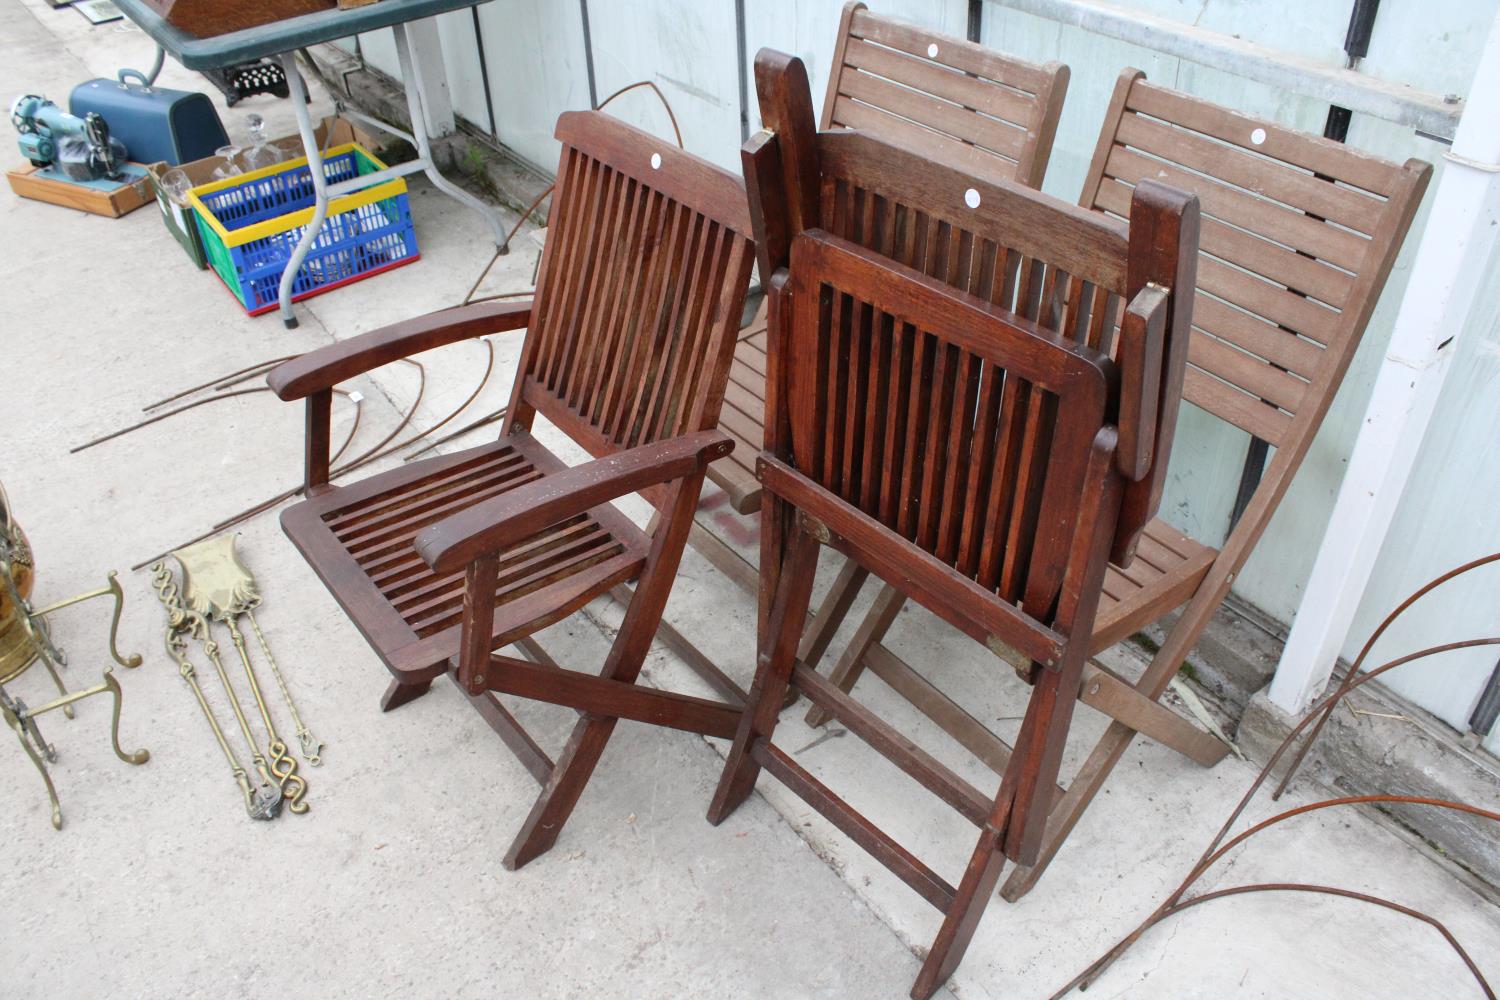 TWO PAIRS OF TEAK FOLDING CHAIRS AND A WOODEN SLATTED TABLE - Image 3 of 4